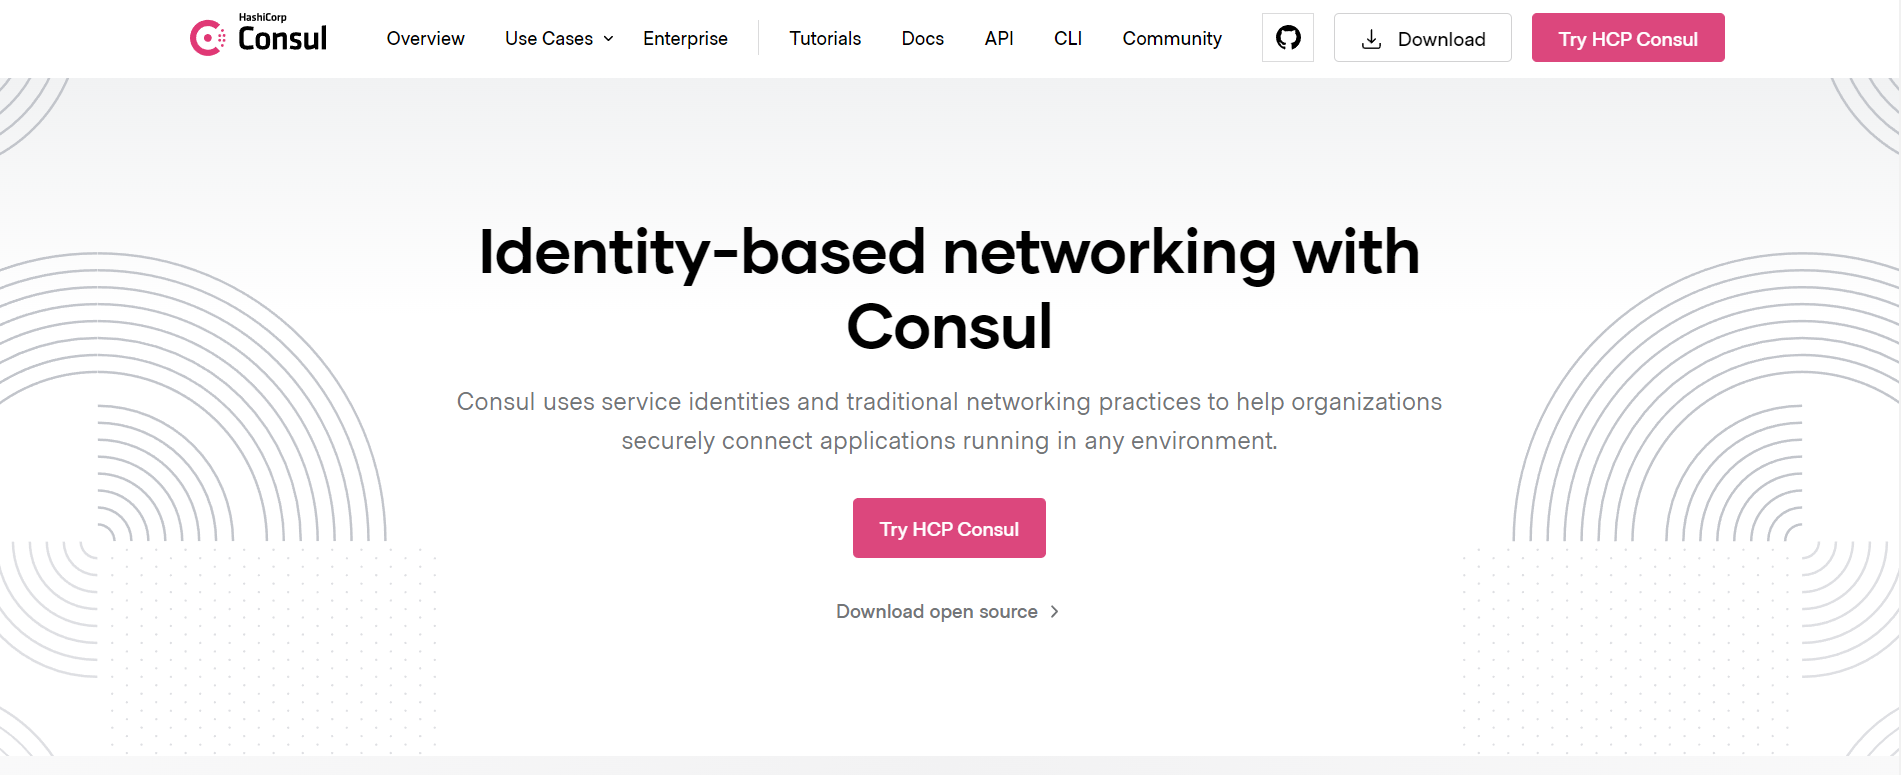 HashiCorp Consul Overview